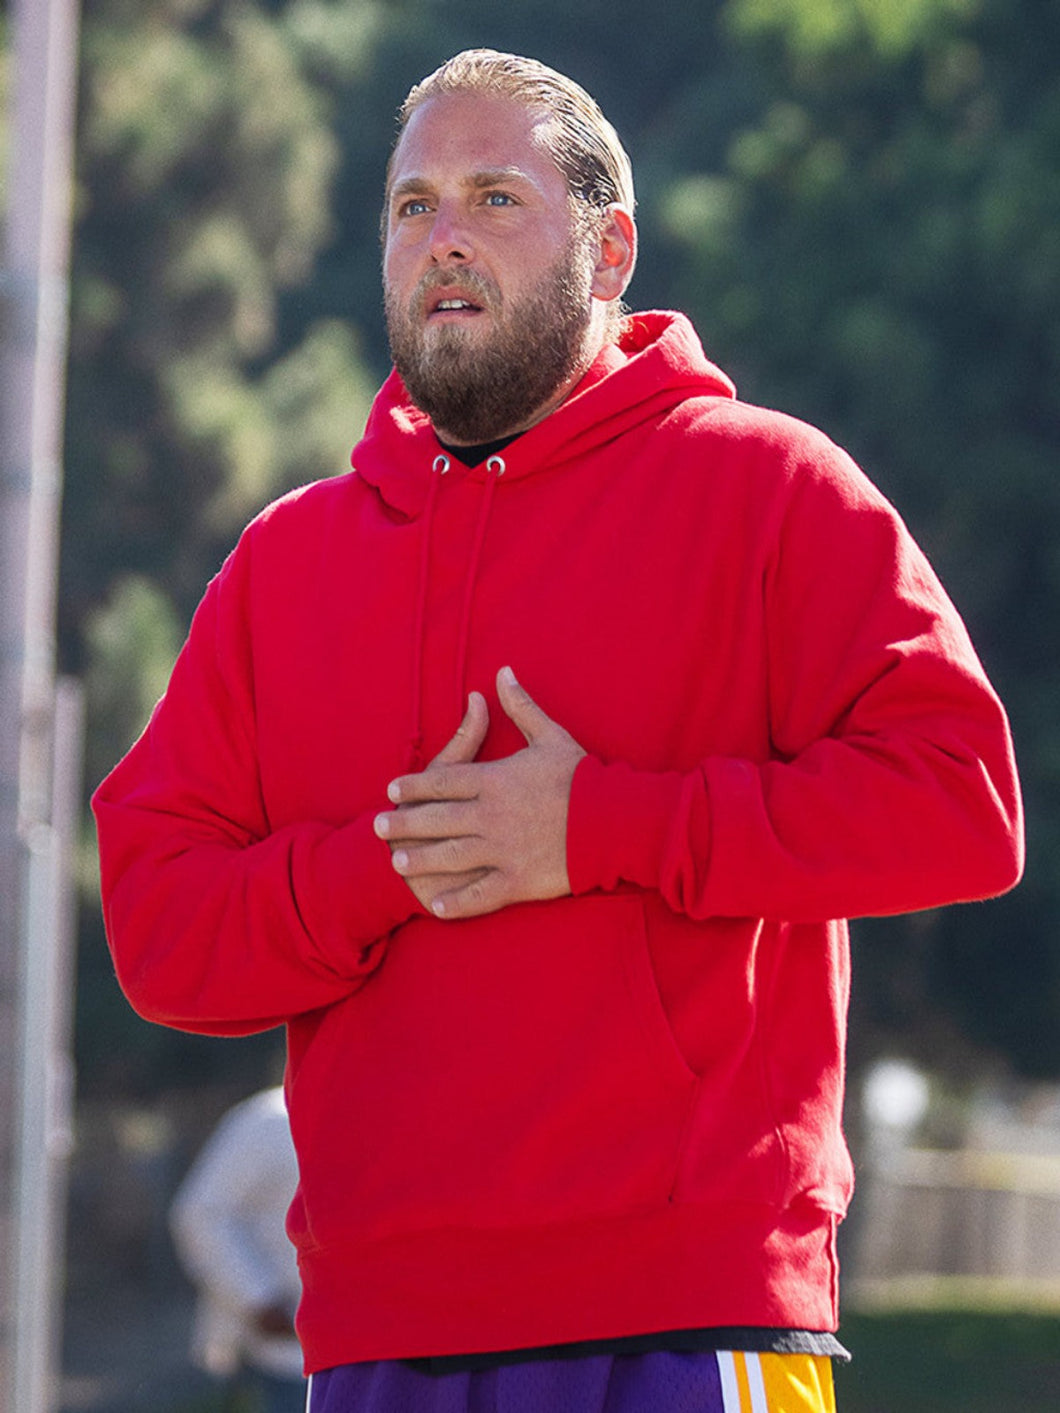 Jonah Hill You People 2023 Red Hooded Jacket